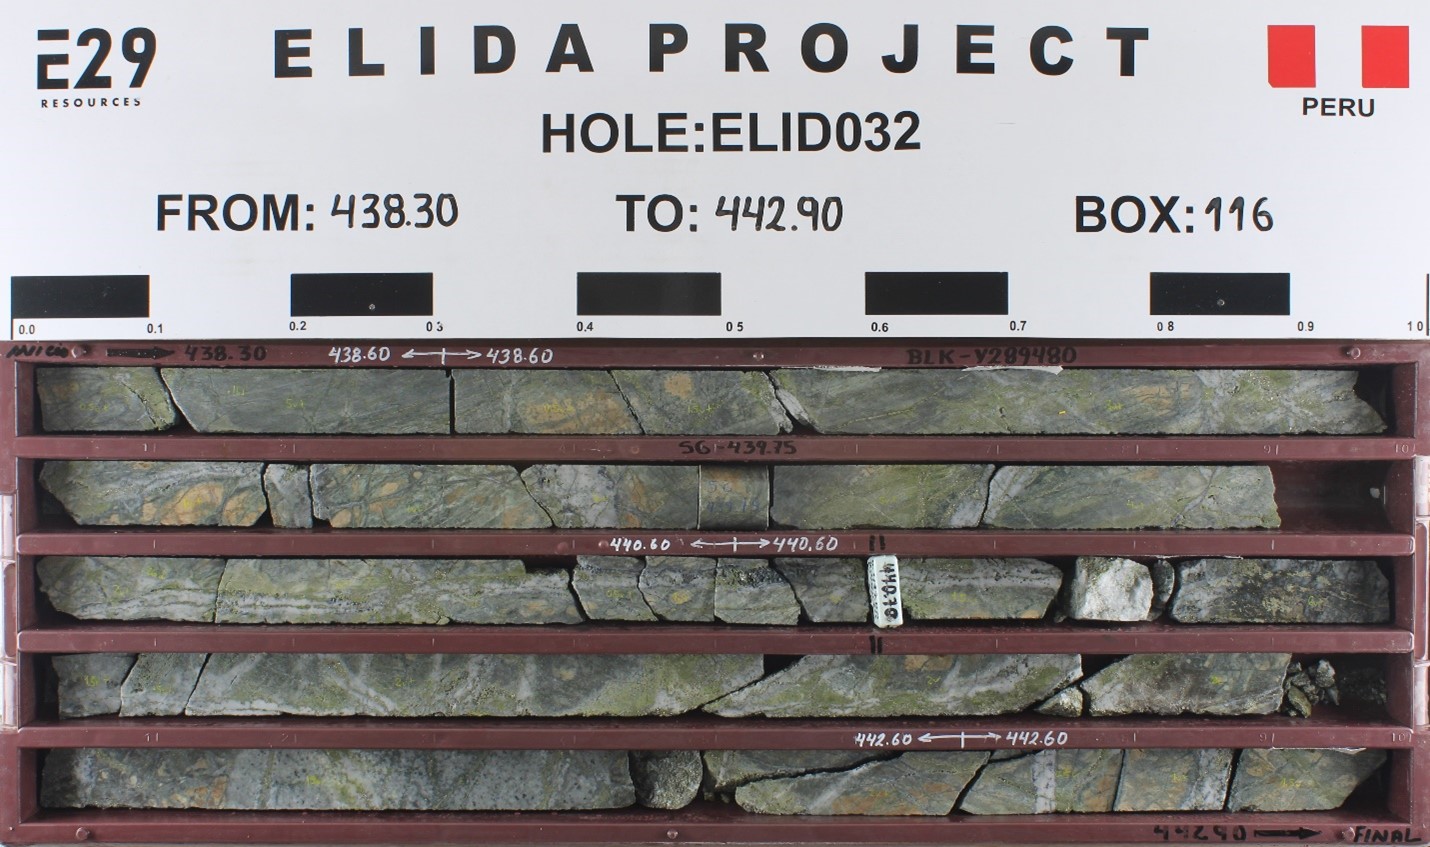 An example of porphyry style mineralization from hole ELID032. Strong, multiphase veinlets are developed in calcareous sandstone host rock. Carbonate-bearing host rocks result in a skarn alteration assemblage of garnet and diopside, which is consistently overprinted by all mineralized vein phases. Multiple generations of quartz (A and B types) and sulphide veinlets are visible. Hydrothermal potassium feldspar and biotite replacing primary sedimentary minerals reveal a potassic environment of formation. Samples pertaining to core in this box are: 436.6-438.6 m, 0.77% Cu, 0.038% Mo, 5.4 g/y Ag; 438.6-440.6 m, 0.89% Cu, 0.048% Mo, 7.4 g/t Ag; 440.6-442.6 m, 1.02% Cu, 0.029% Mo, 12.2 g/t Ag; 442.6-444.6 m, 0.49% Cu, 0.092% Mo, 4.6 g/t Ag. Core is NQ diameter (47.6 mm).